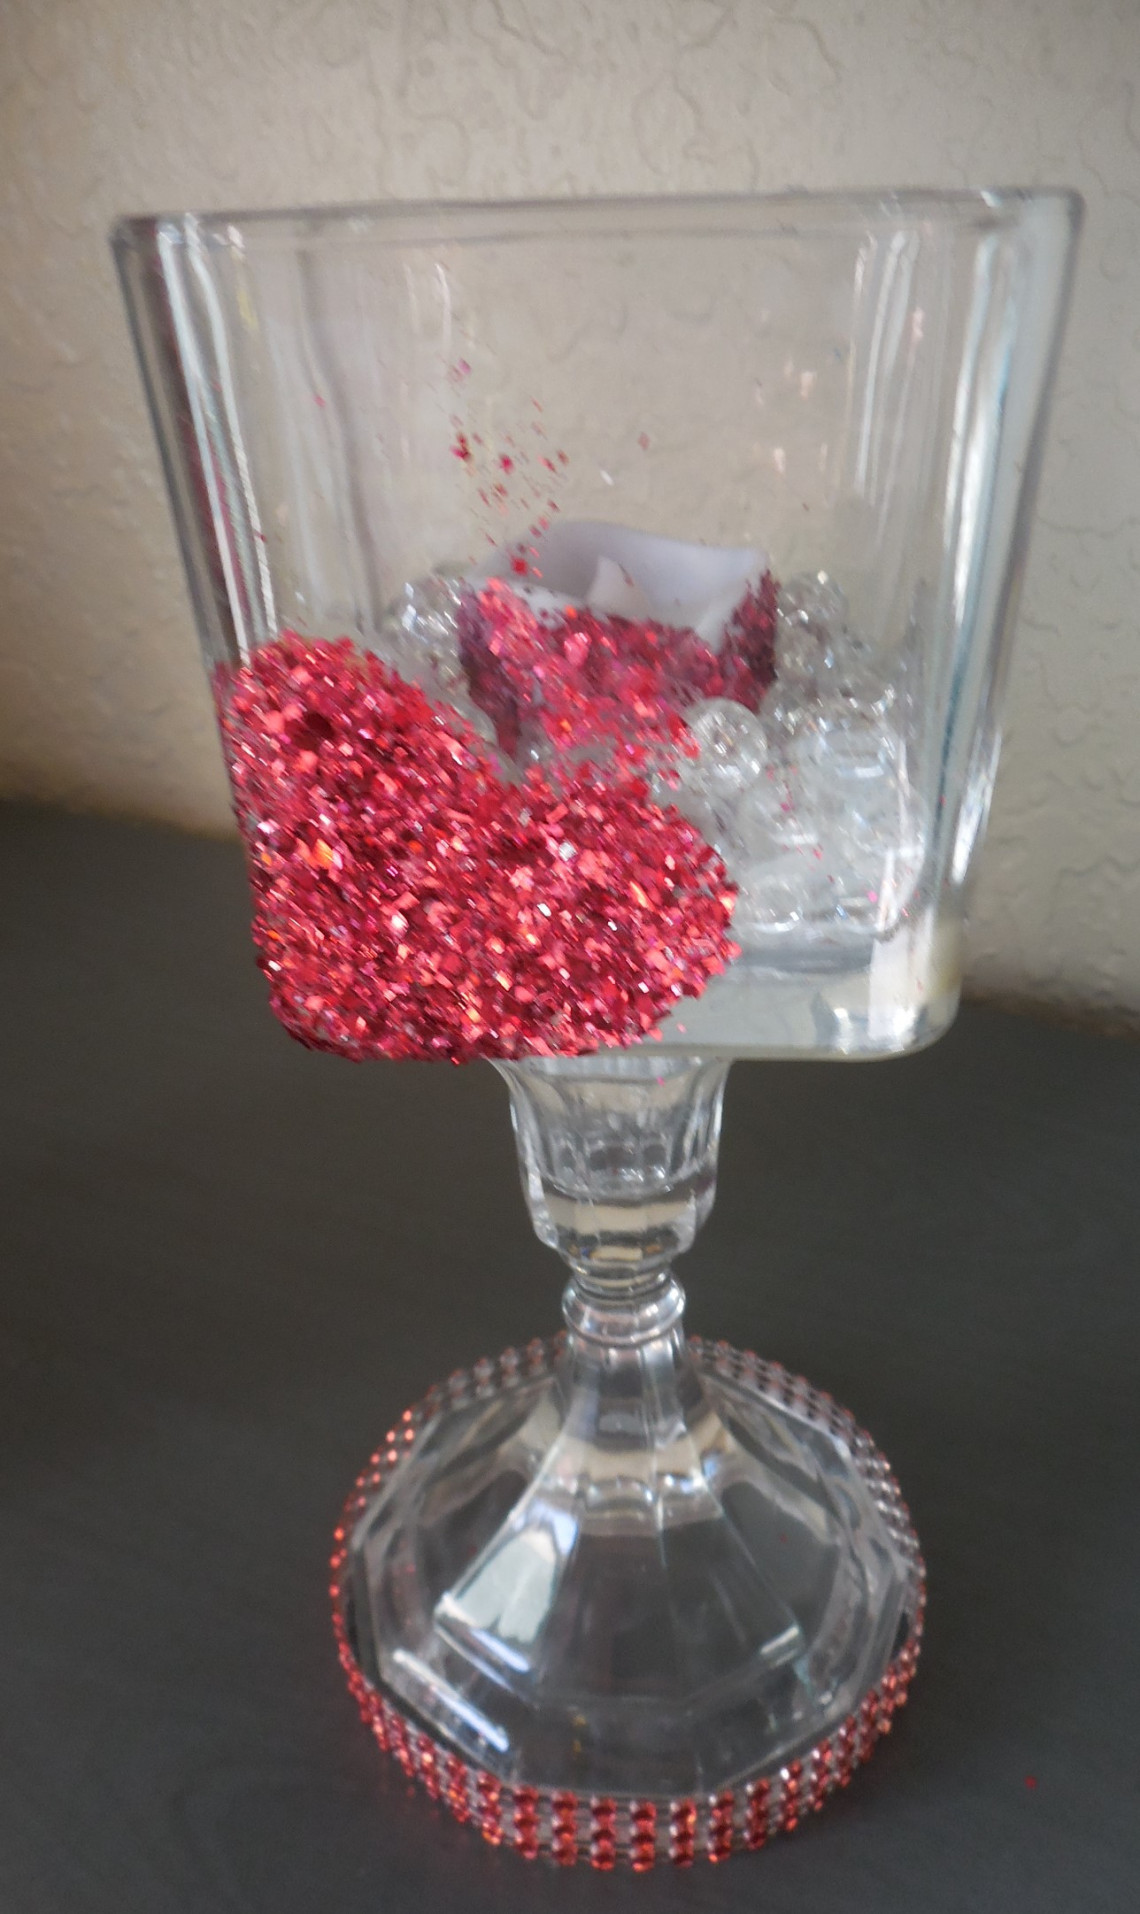 28 Elegant Mod Podge Glitter Vase 2024 free download mod podge glitter vase of easy valentines day craft kelleysdiy regarding to keep the glitter in its placeyou can mod podge over the heart